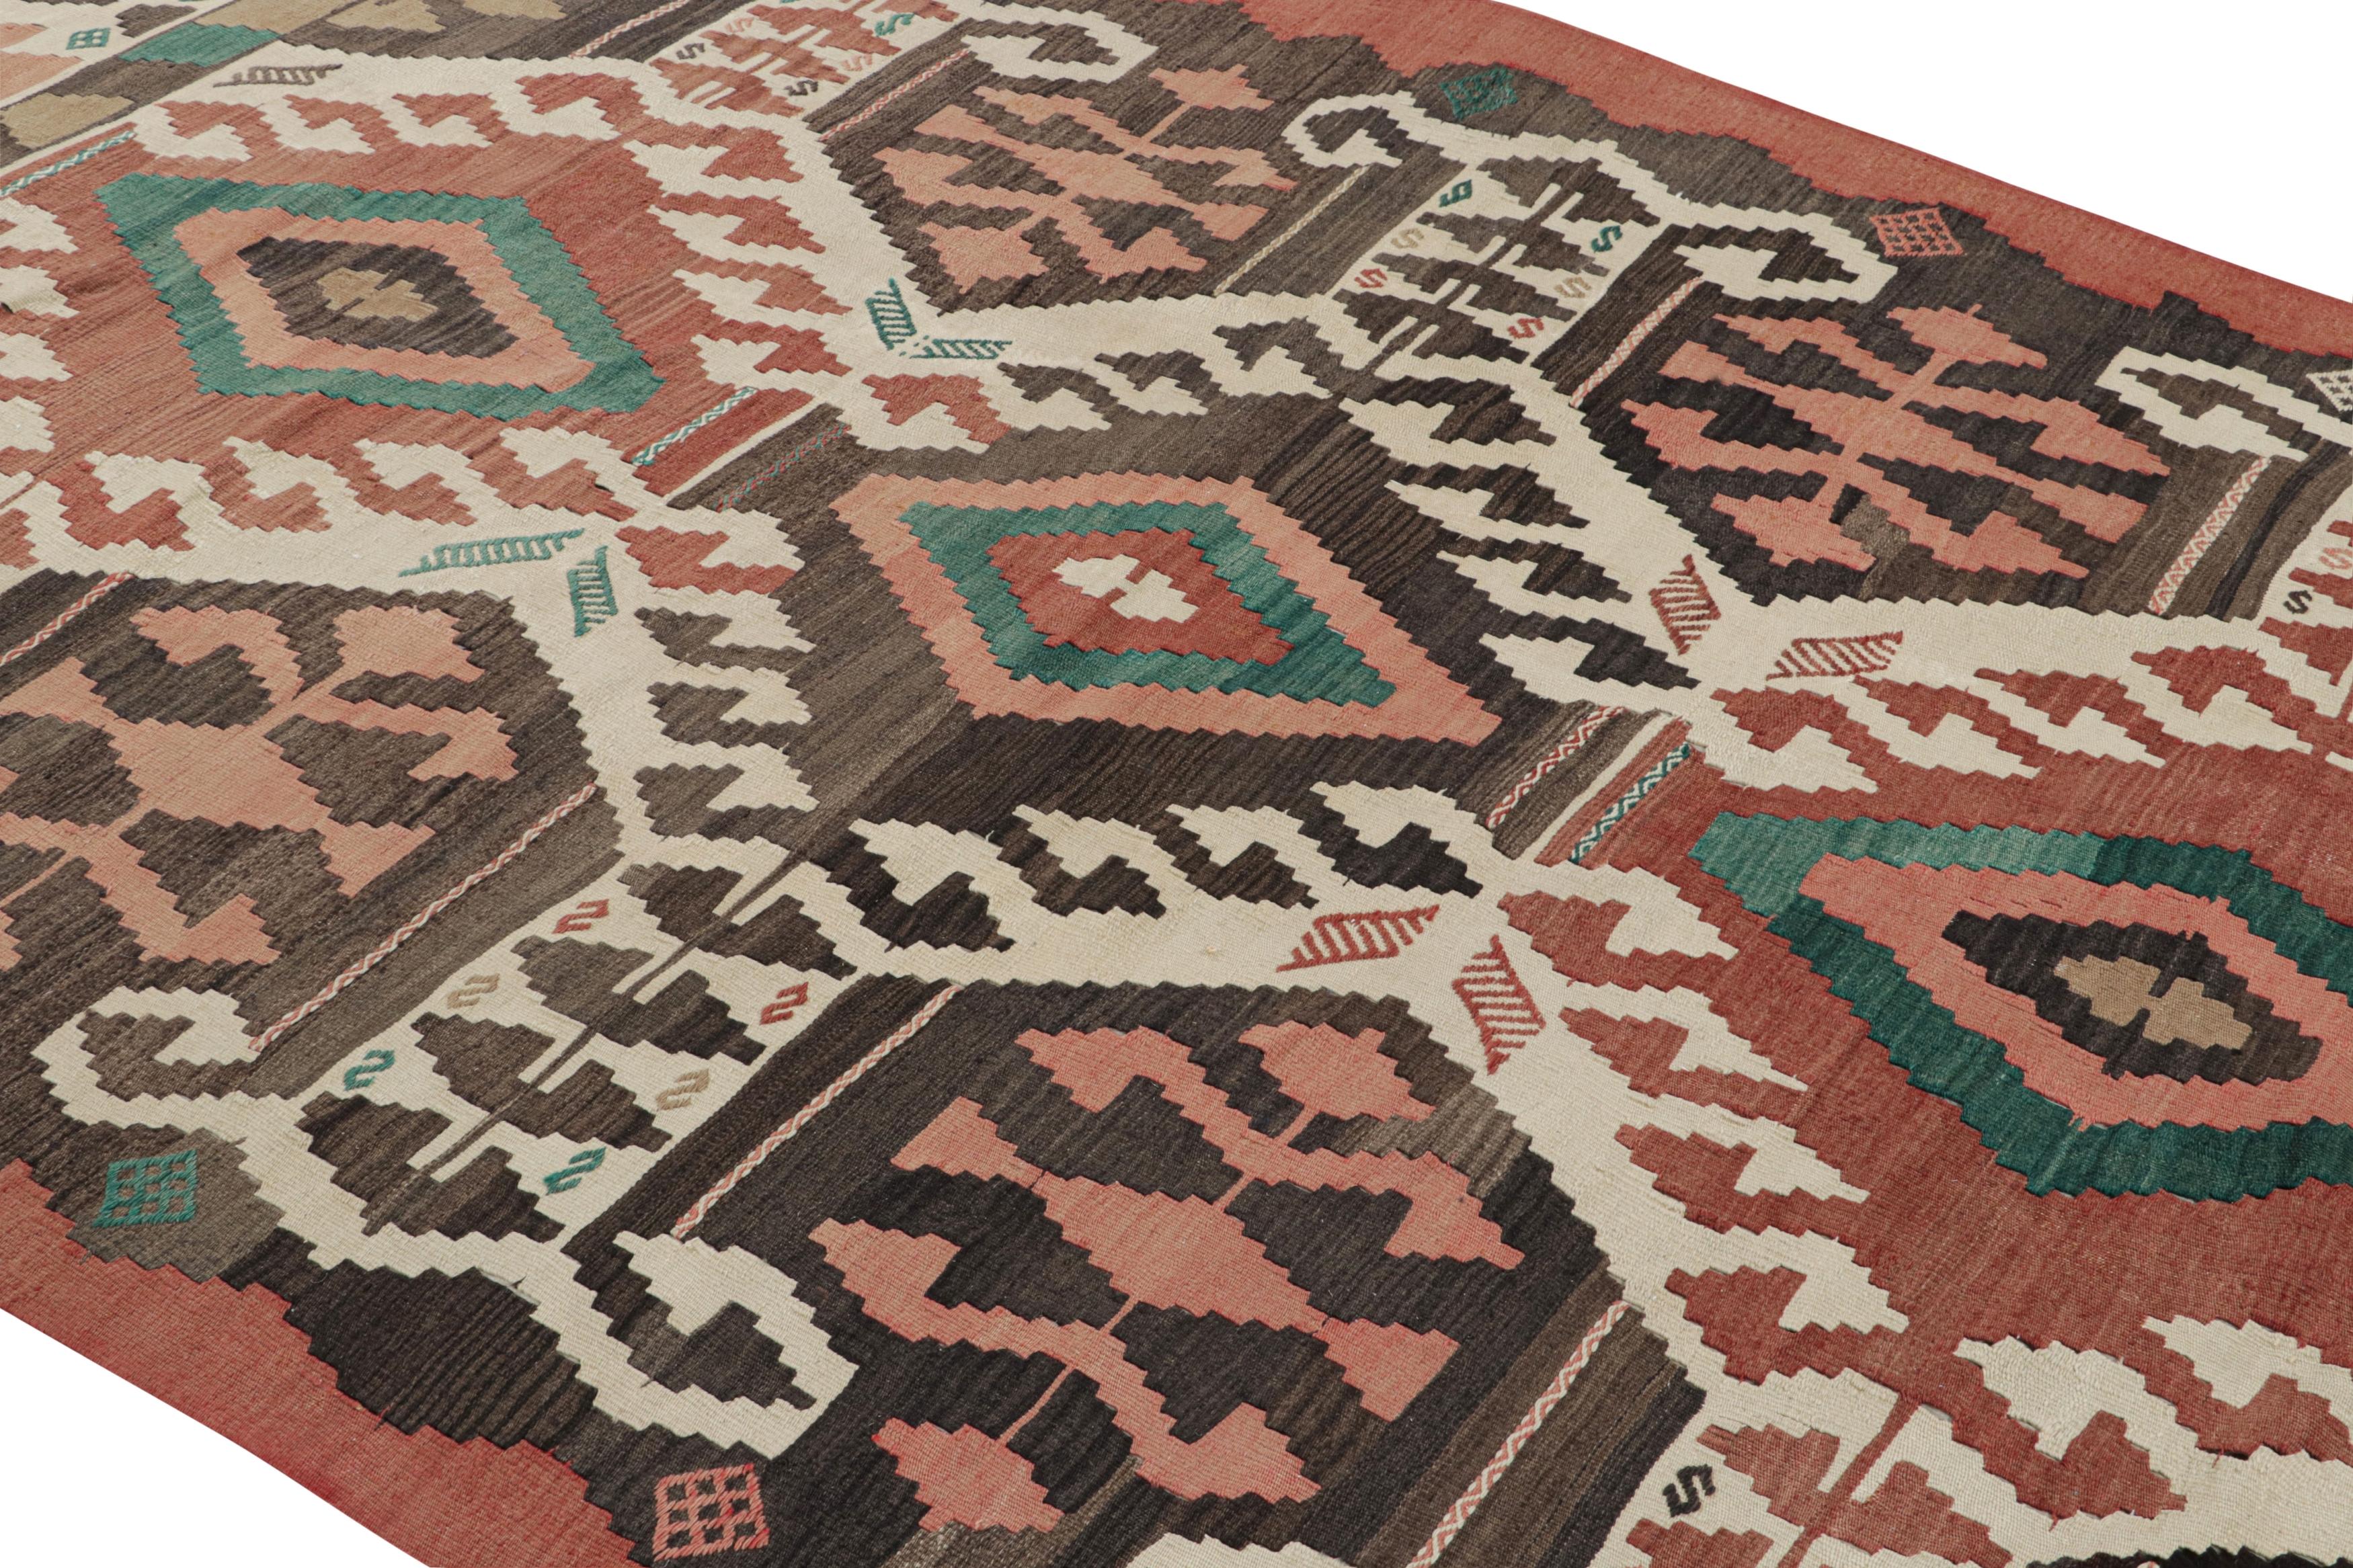 Handwoven in a wool flat weave originating from Turkey circa 1950-1960, this vintage Kilim rug connotes a midcentury tribal design of a rare colorway variation, sporting a prevailing pink and green accent to the beige-brown colorway in this